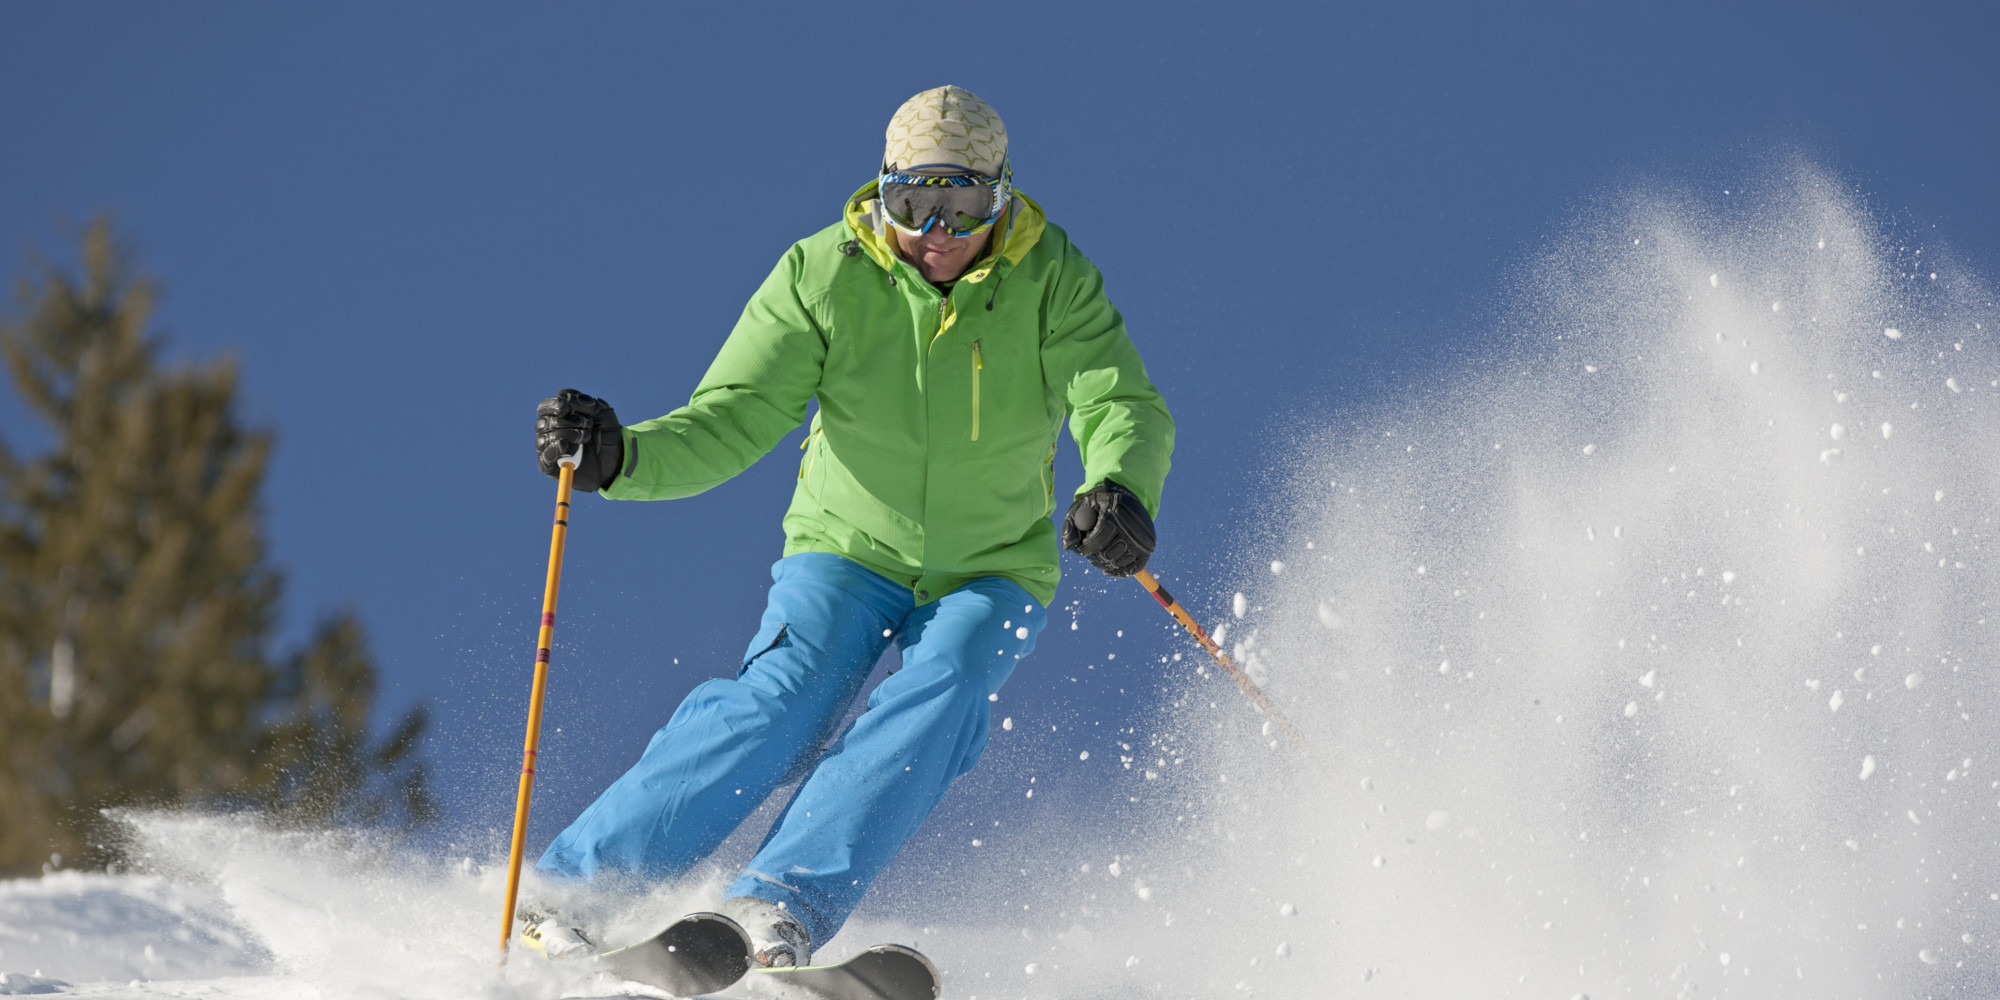 What You Must Always Remember If You're An Older Skier | HuffPost